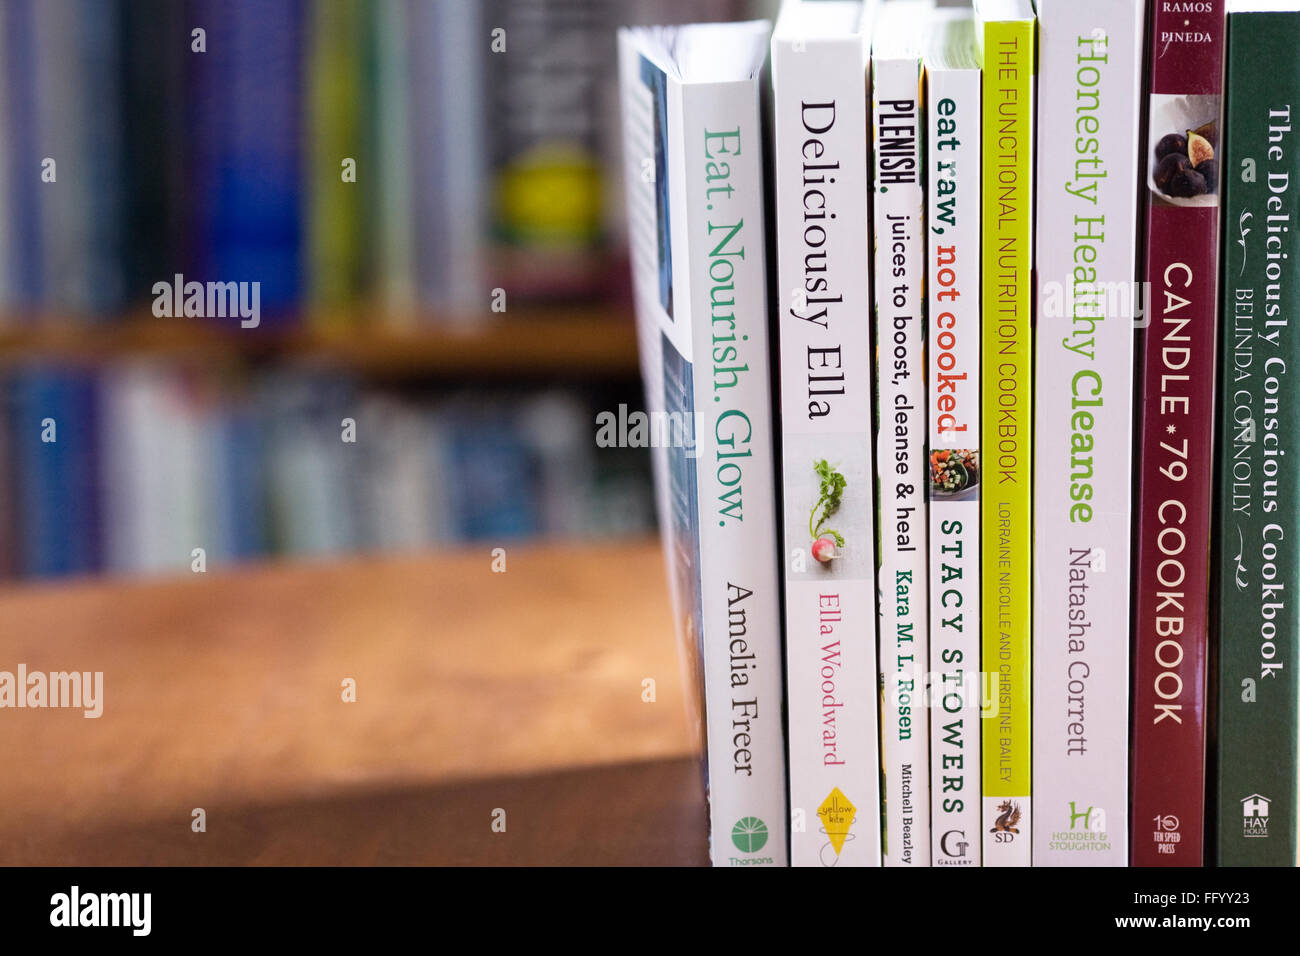 Healthy Eating Cookery books on a wooden table. Stock Photo